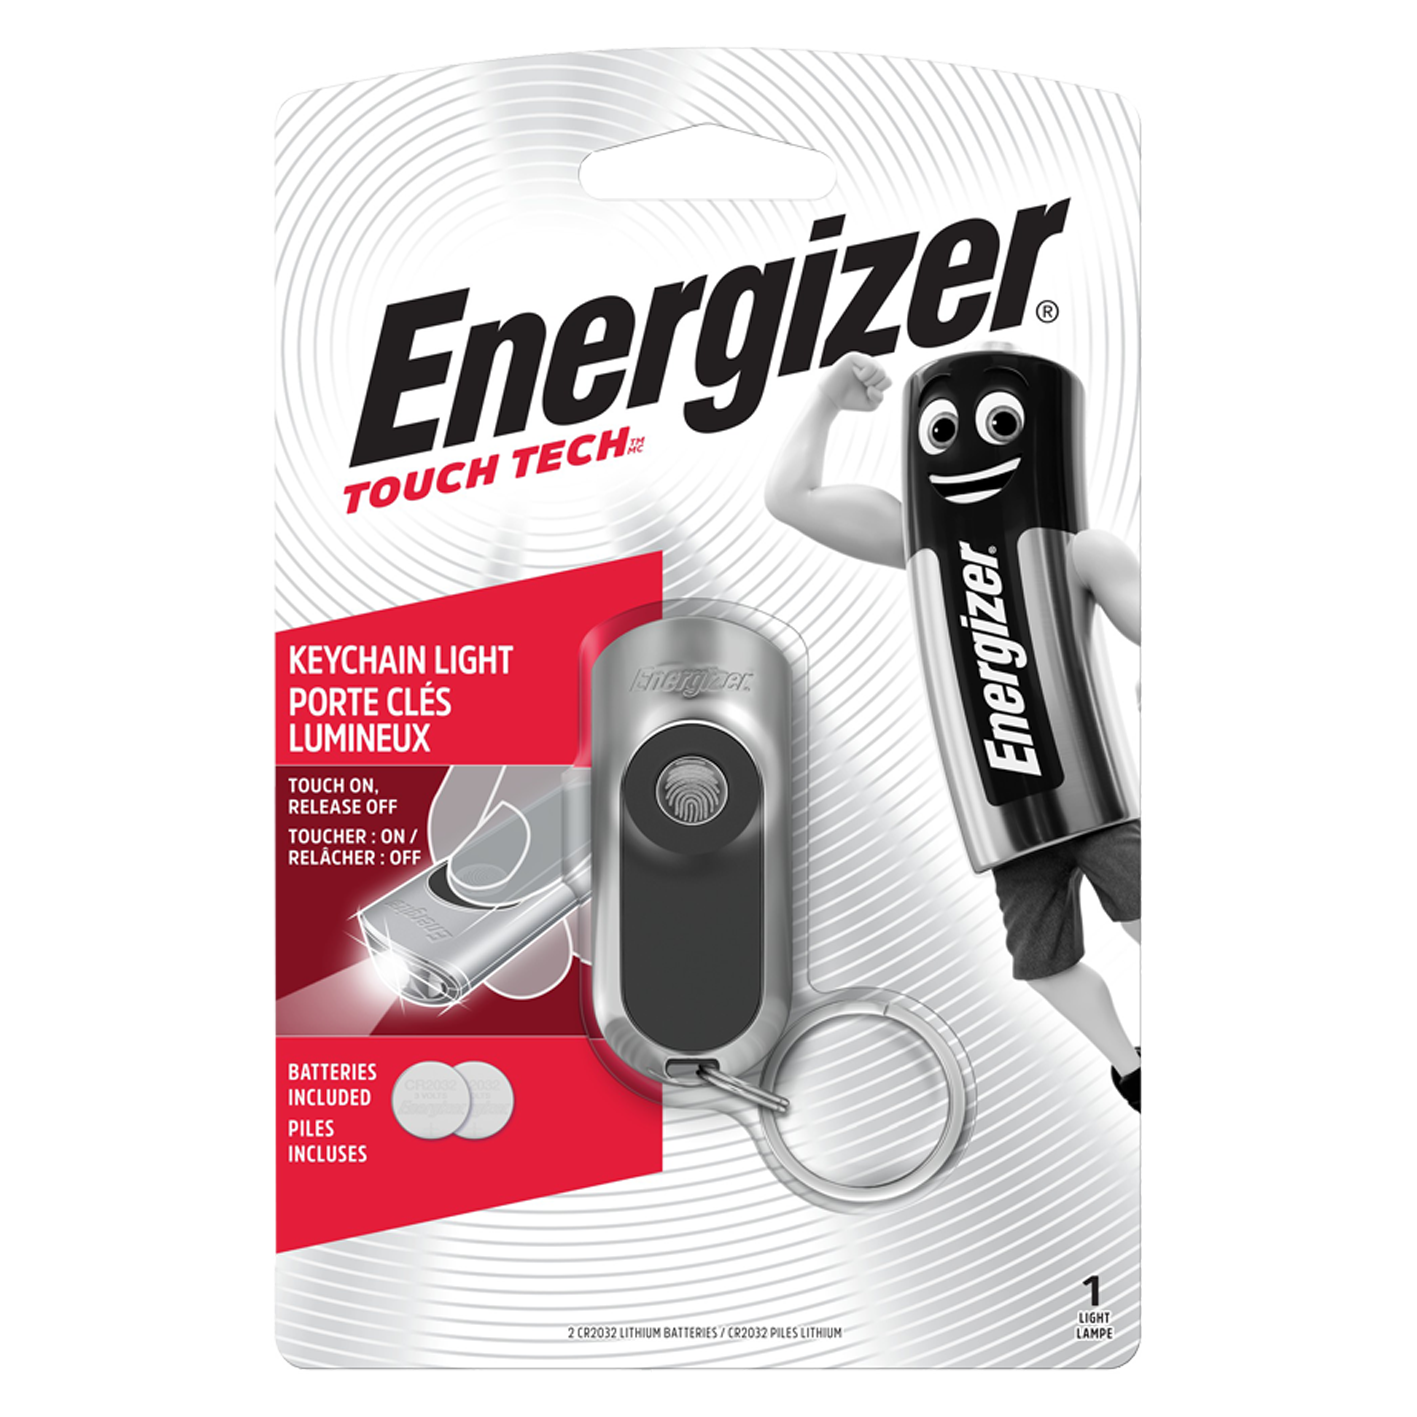 Energizer LED Keychain Touch Tech Torch With 2 x CR2032 Batteries